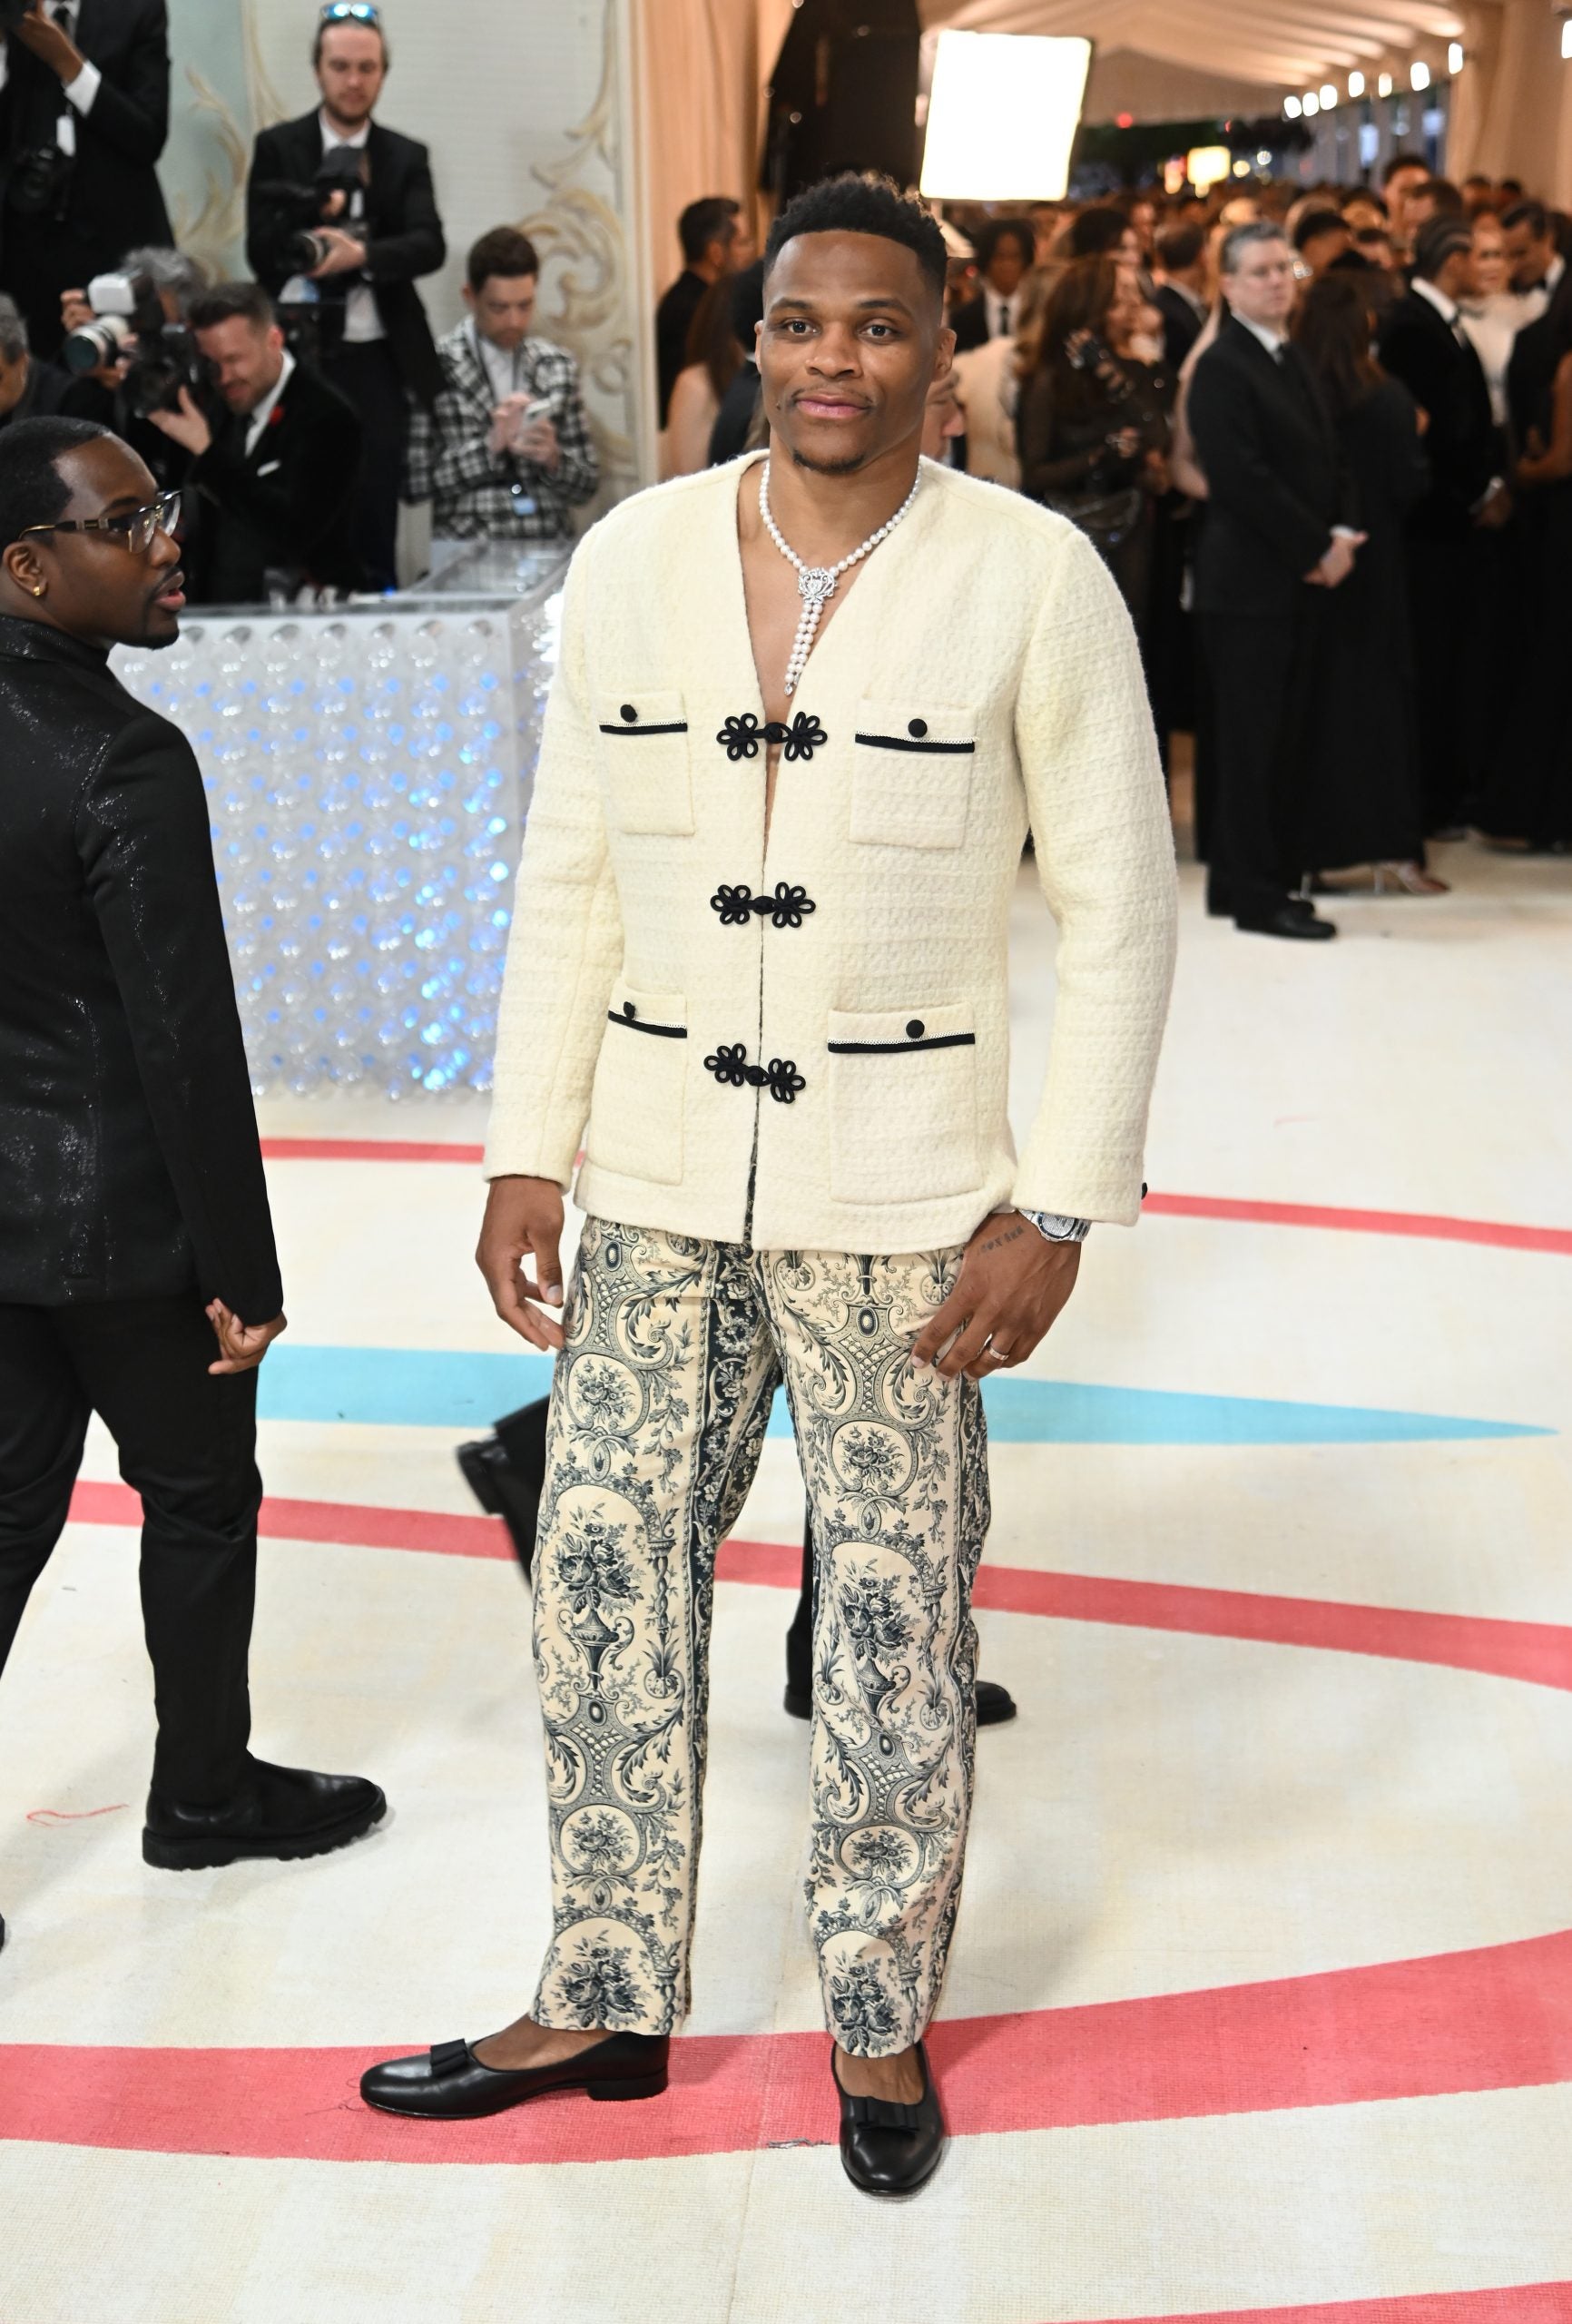 Let's Hear It For The Boys: Top Men's Looks From The 2023 Met Gala